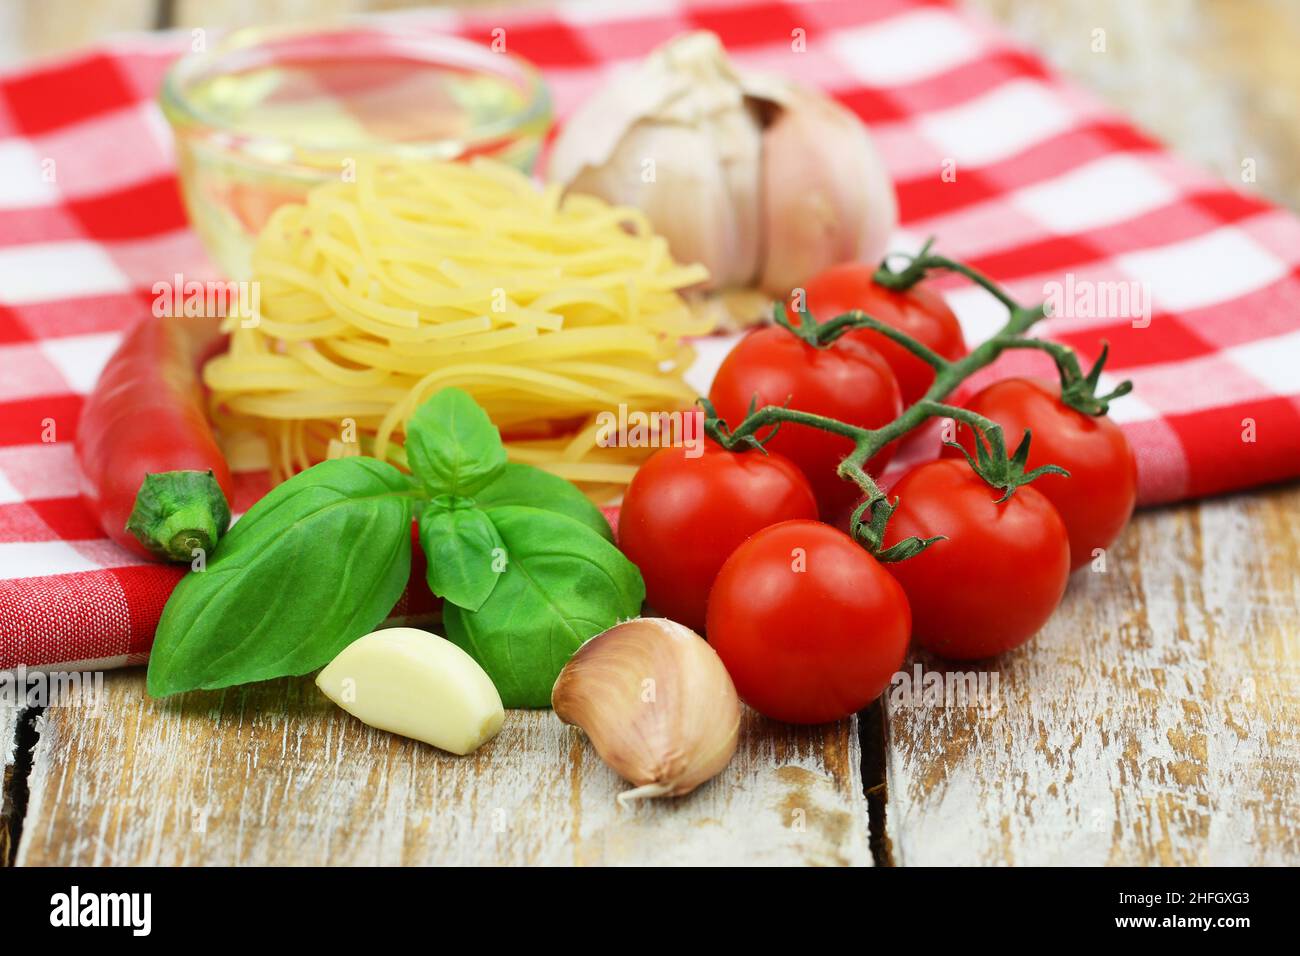 Ingredients for cooking pasta: tagliatelle, cherry tomatoes, garlic, fresh basil, chili and bowl of olive oil on checkered cloth Stock Photo